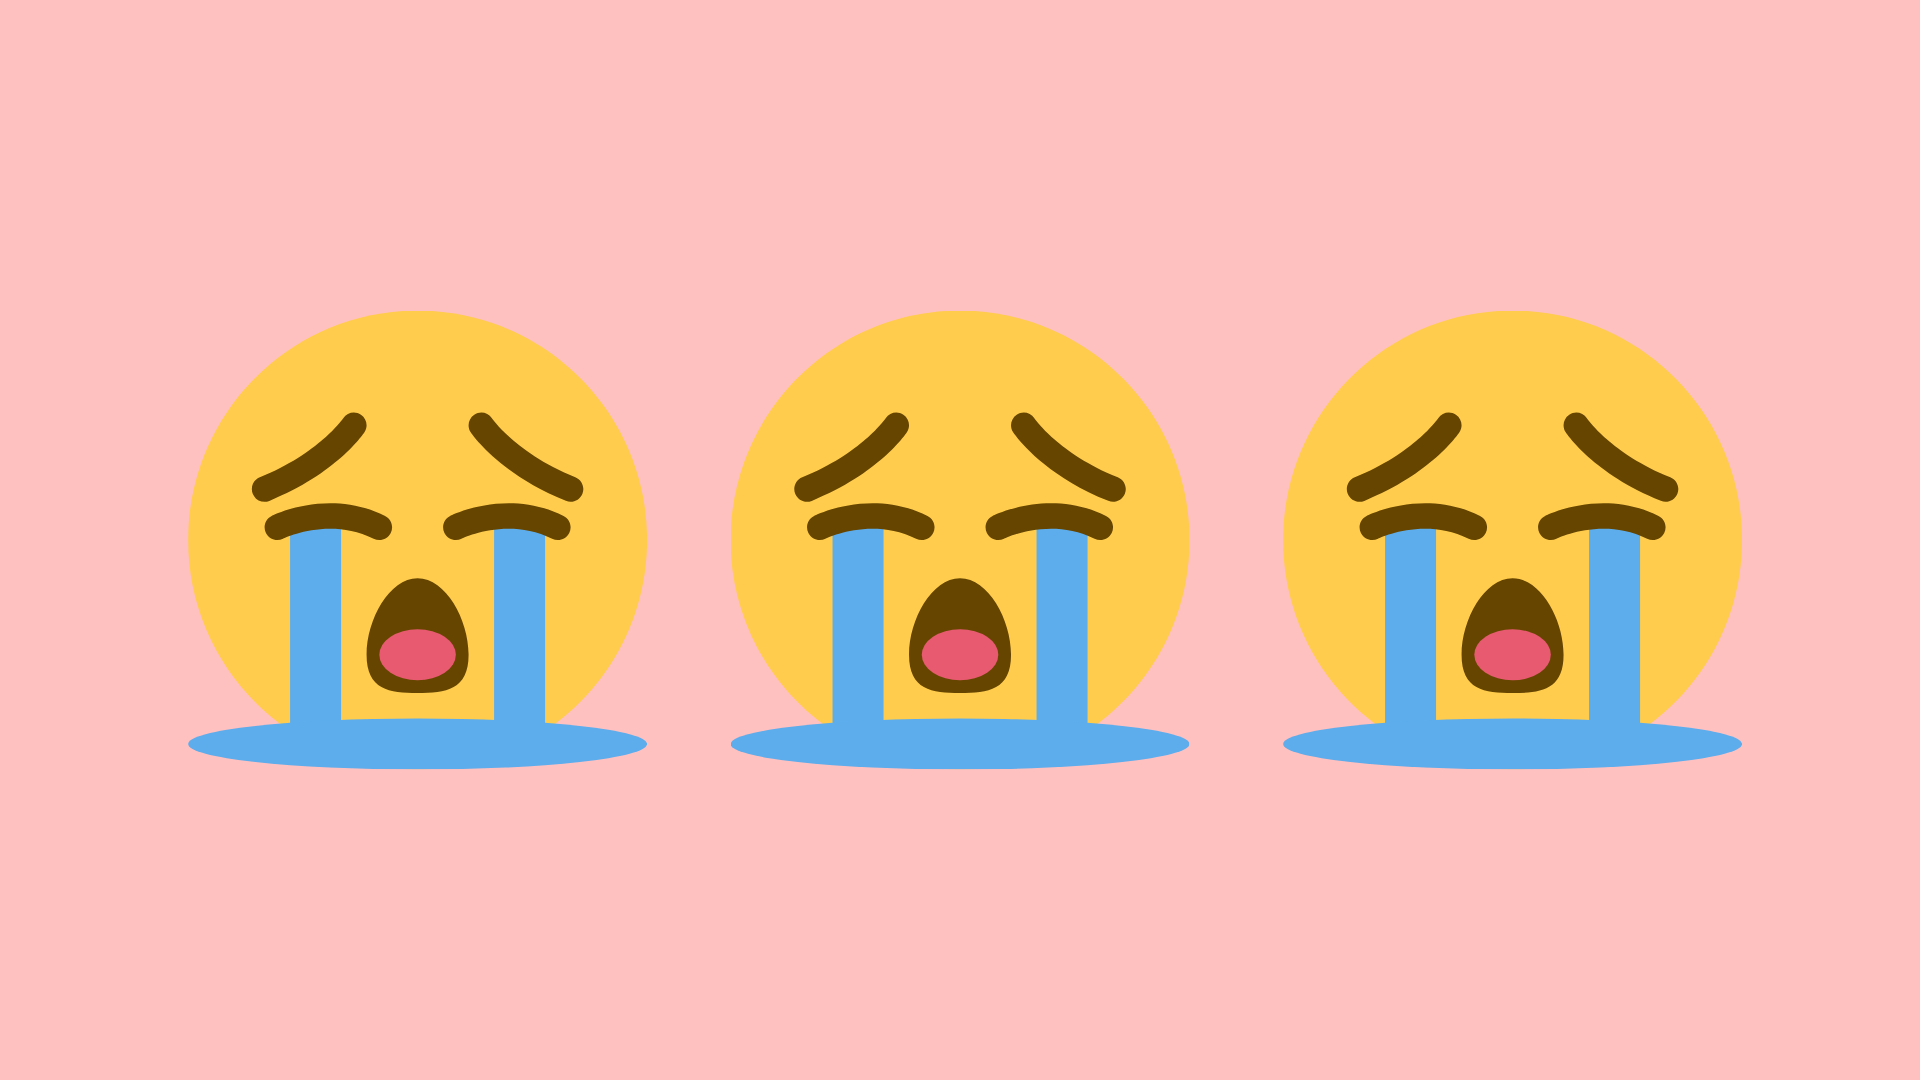 Three yellow sad crying face emojis on a pink background